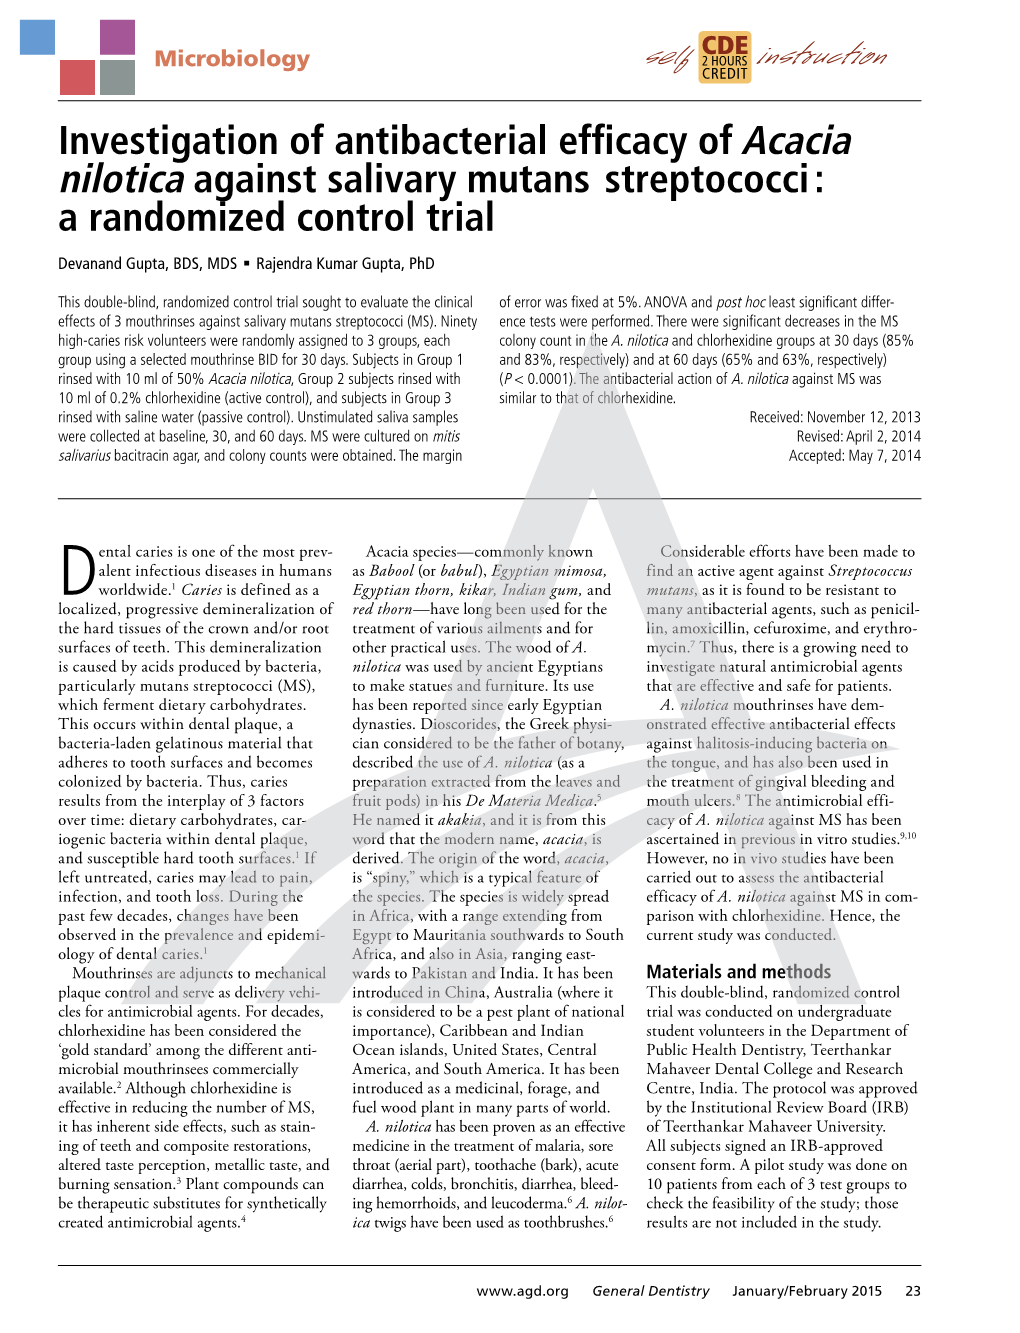 Investigation of Antibacterial Efficacy of Acacia Nilotica Against Salivary Mutans Streptococci: a Randomized Control Trial